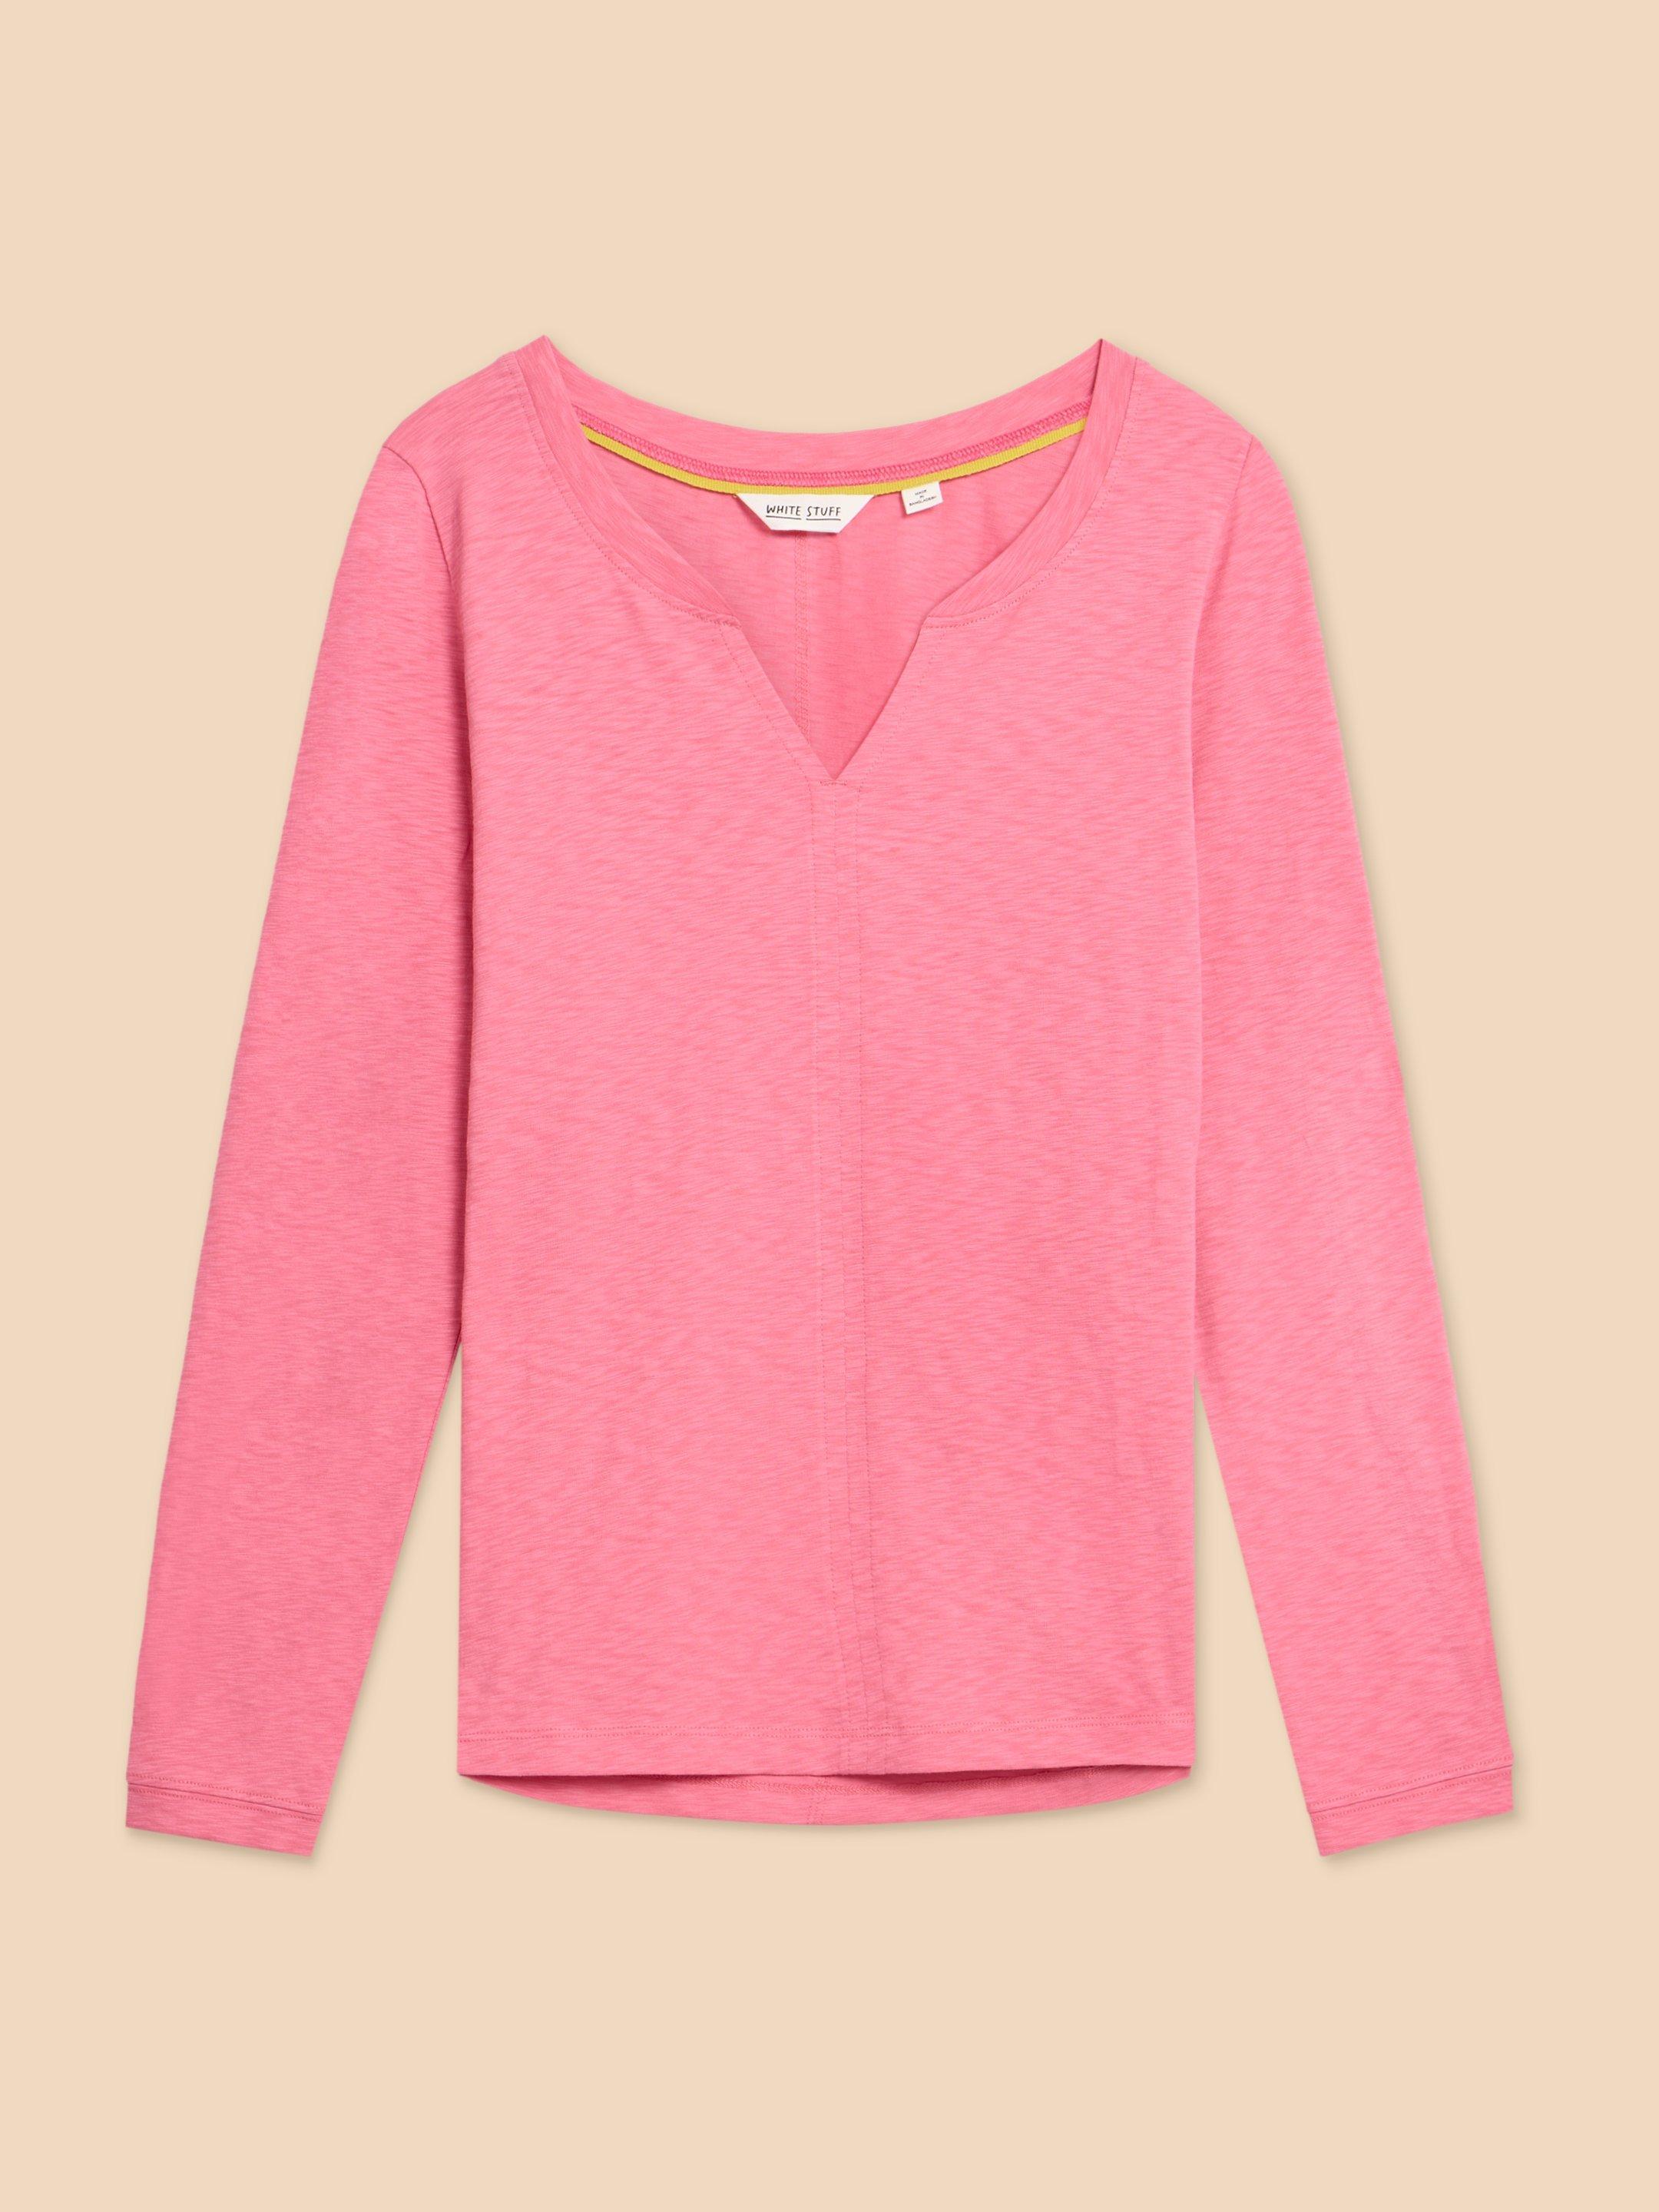 NELLY LS PRINTED TEE in MID PINK - FLAT FRONT